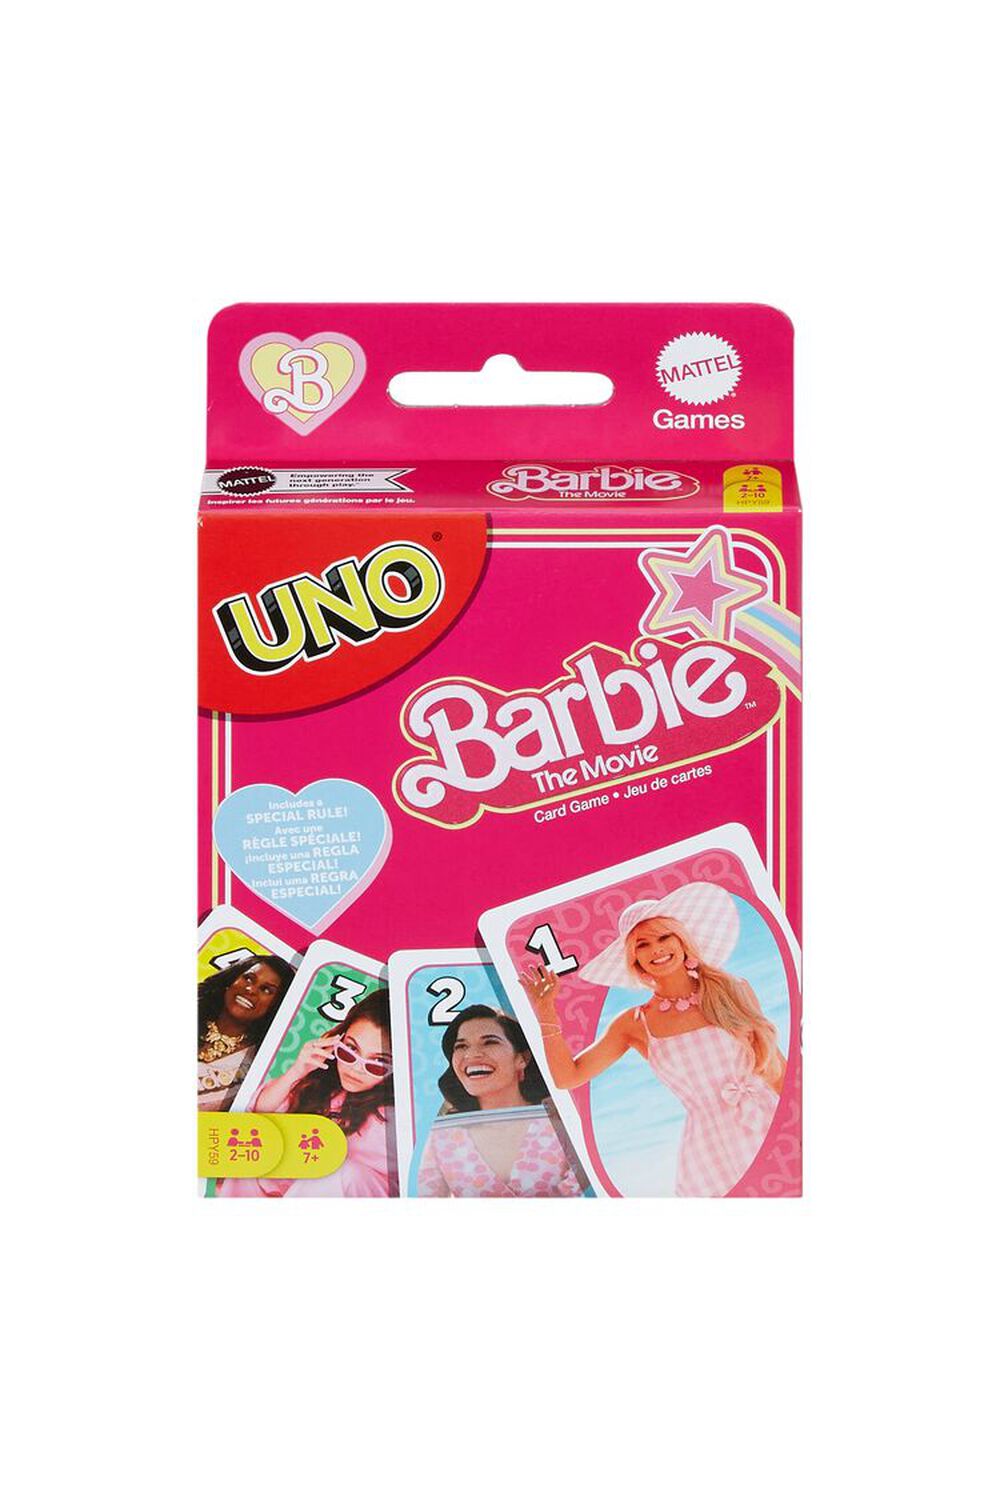 Your favorite classic game, UNO, with a twist! It features a Mattel Barbie The Movie theme and a special rule! Perfect for both kids and adults. - Officially licensed product Content + Care - For ages 7+ - 2 - 10 players